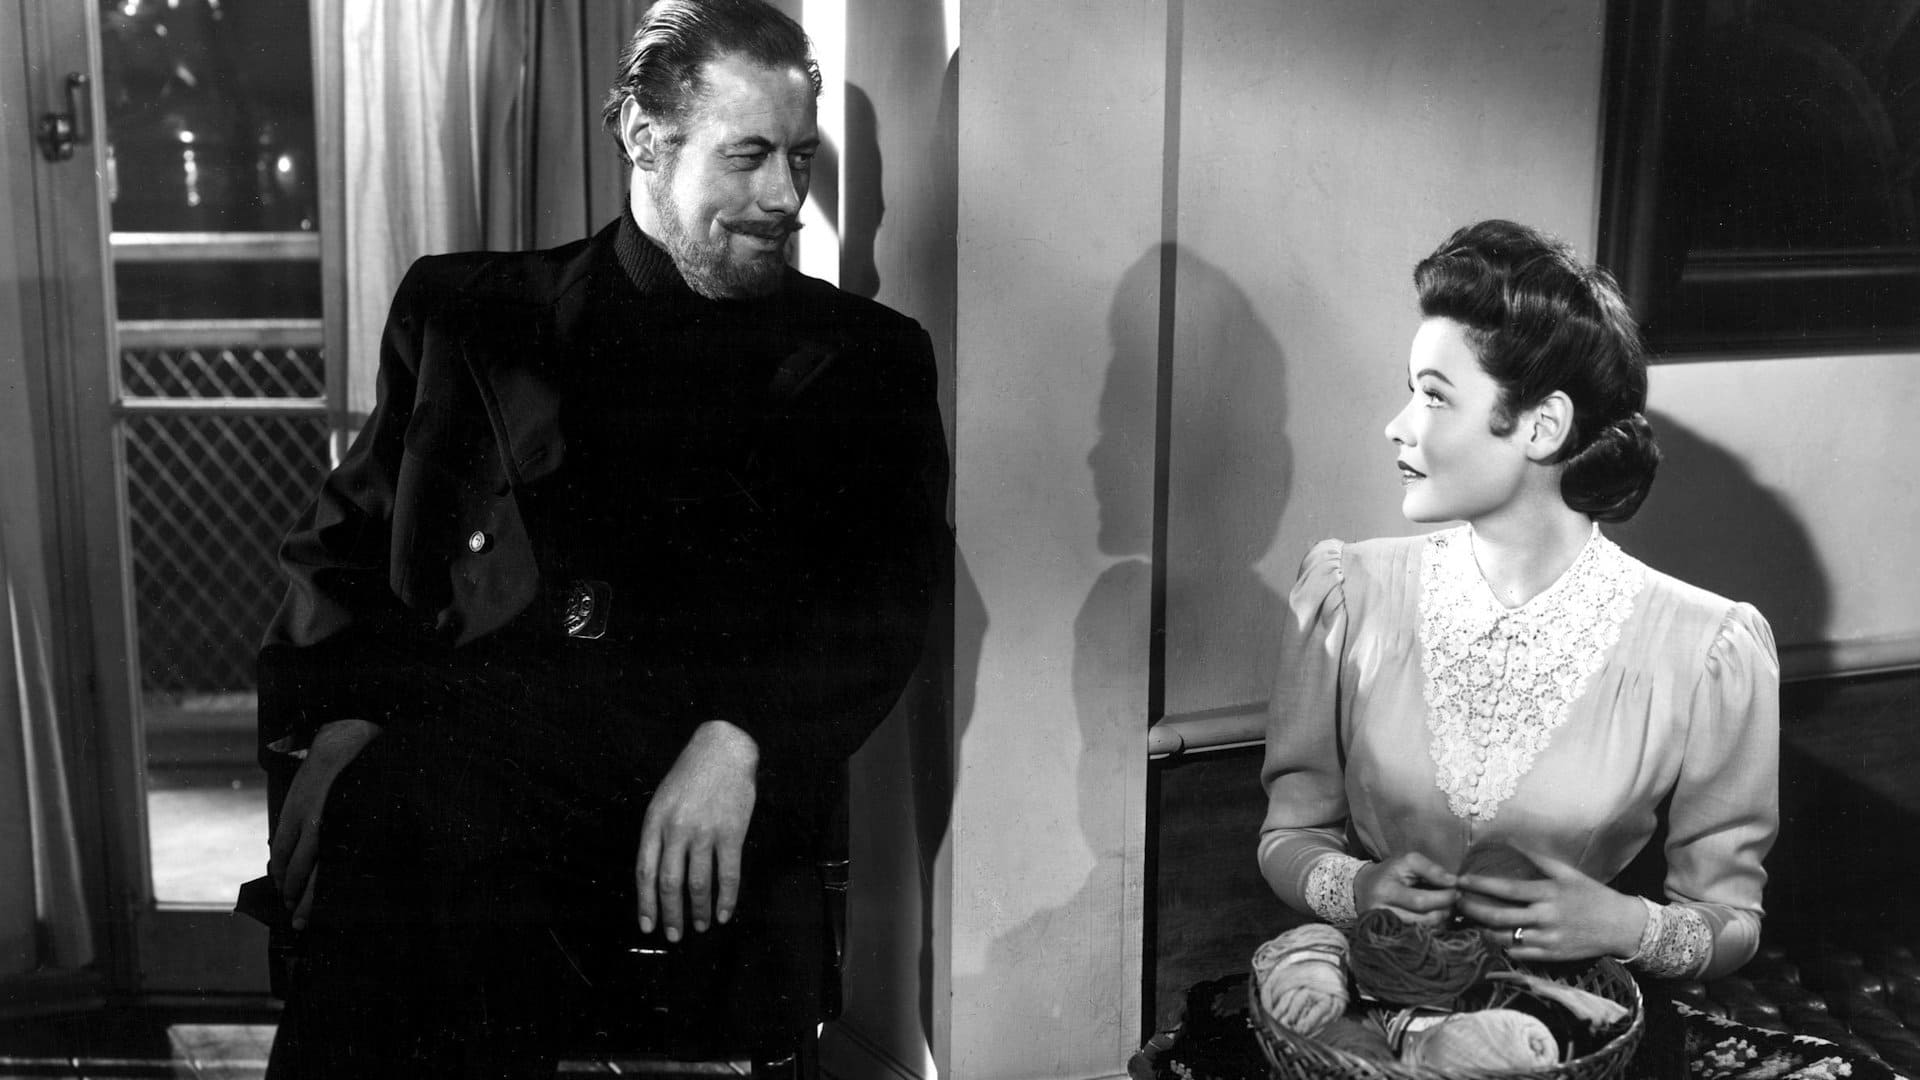 the ghost and mrs muir cast movie